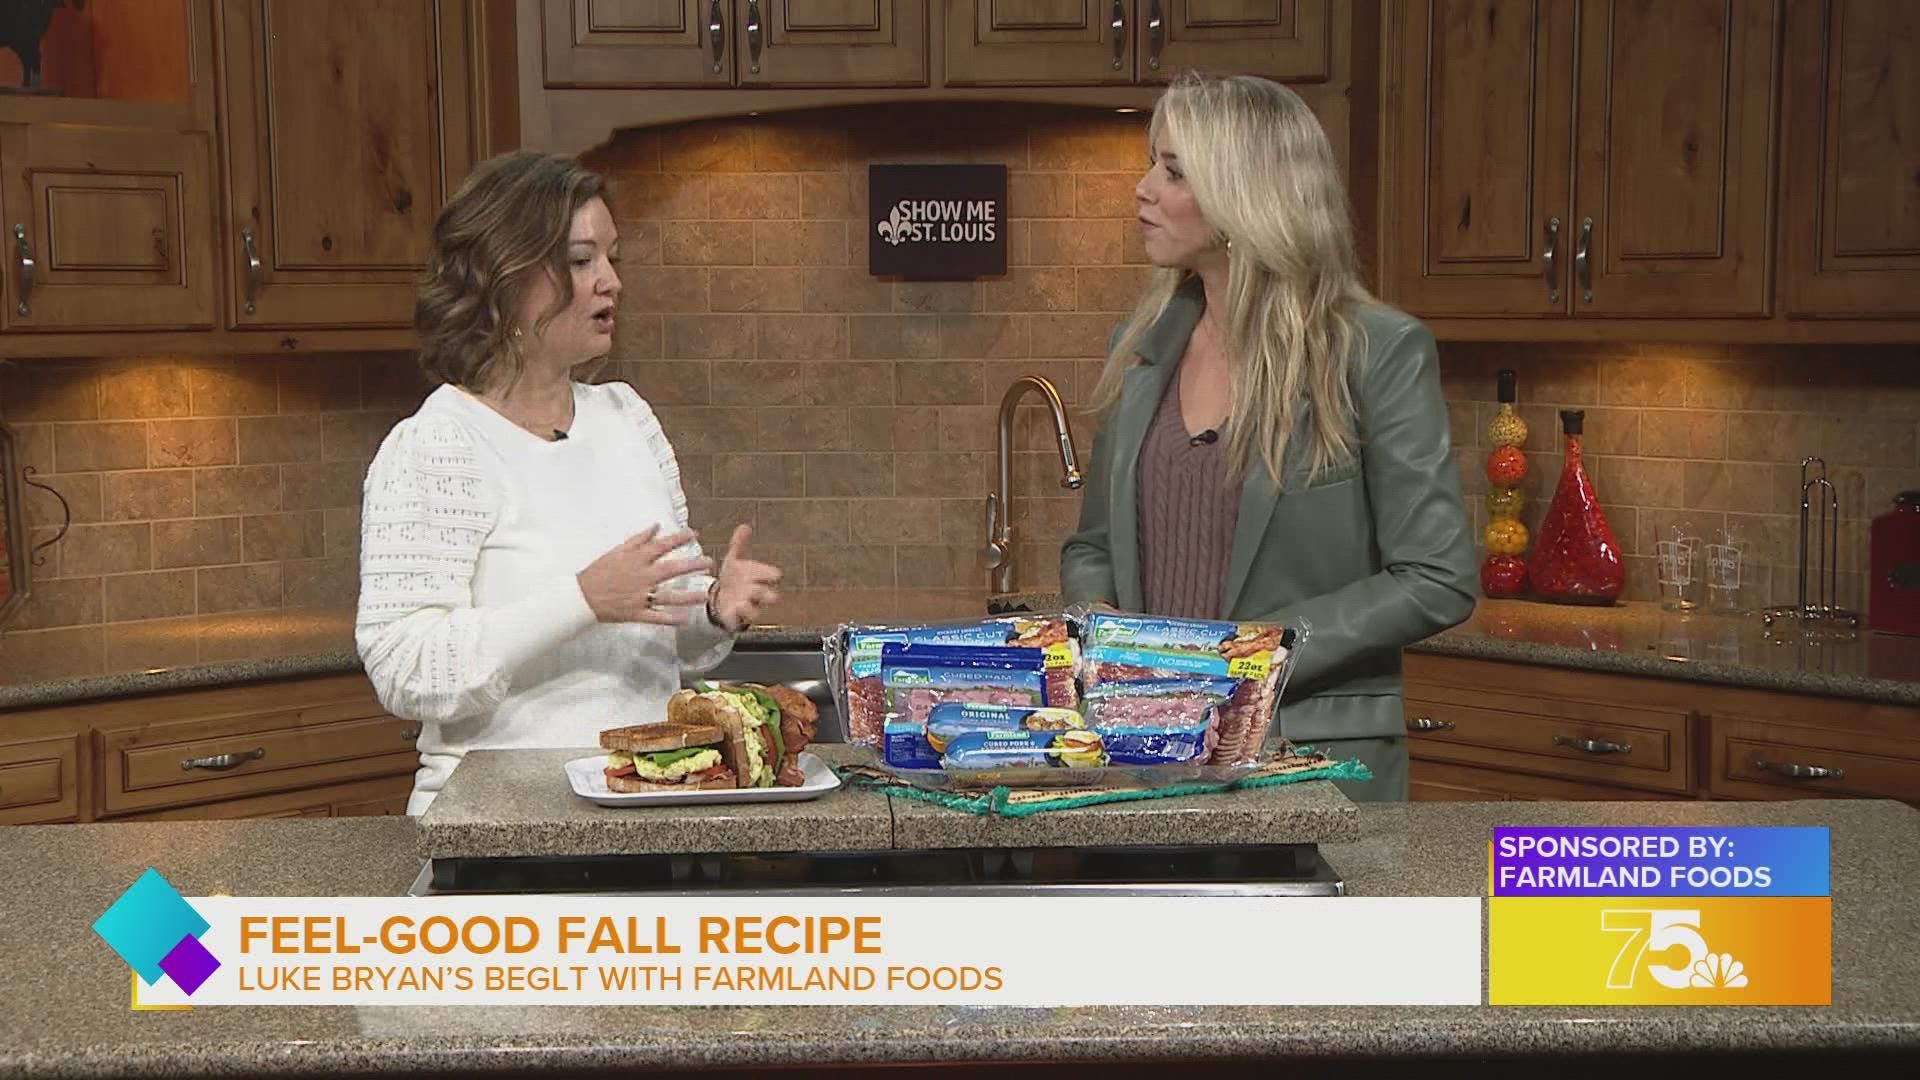 Registered Dietitian Tara Todd joins us with Luke Byran's recipe and a brand that's doing good by giving back.